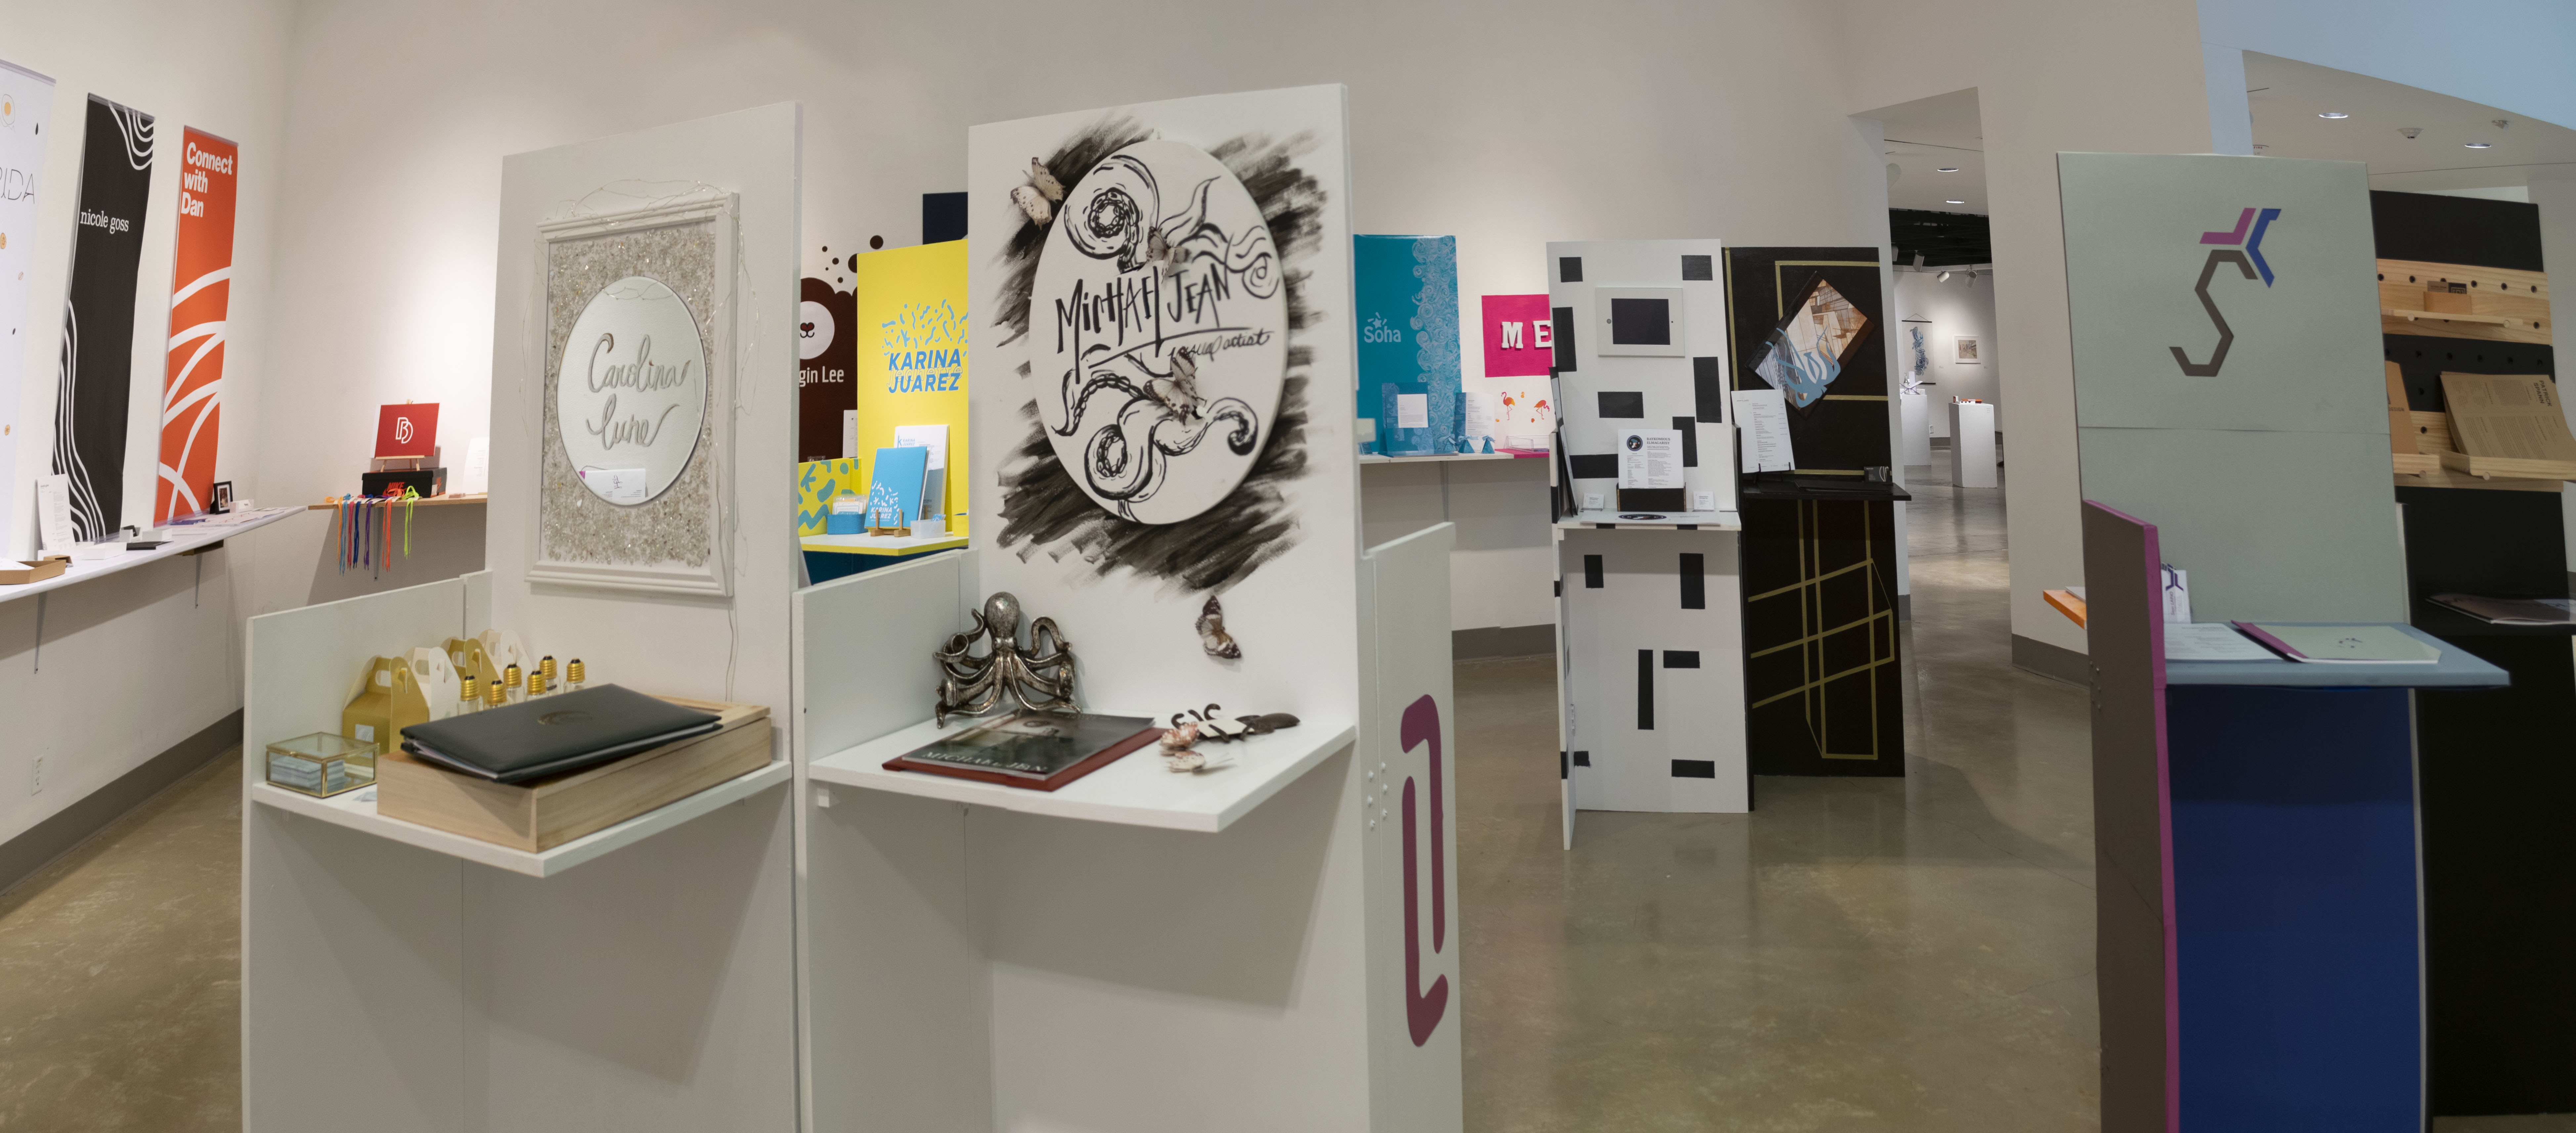 Senior Portfolio area at front of gallery, Exhibition: PolyKroma 2019, Apr. 27, 2019 to May 19, 2019, Co-curated by Michele Cairella Fillmore & Sooyun Im, W. Keith & Janet Kellogg Art Gallery, Cal Poly Pomona. 